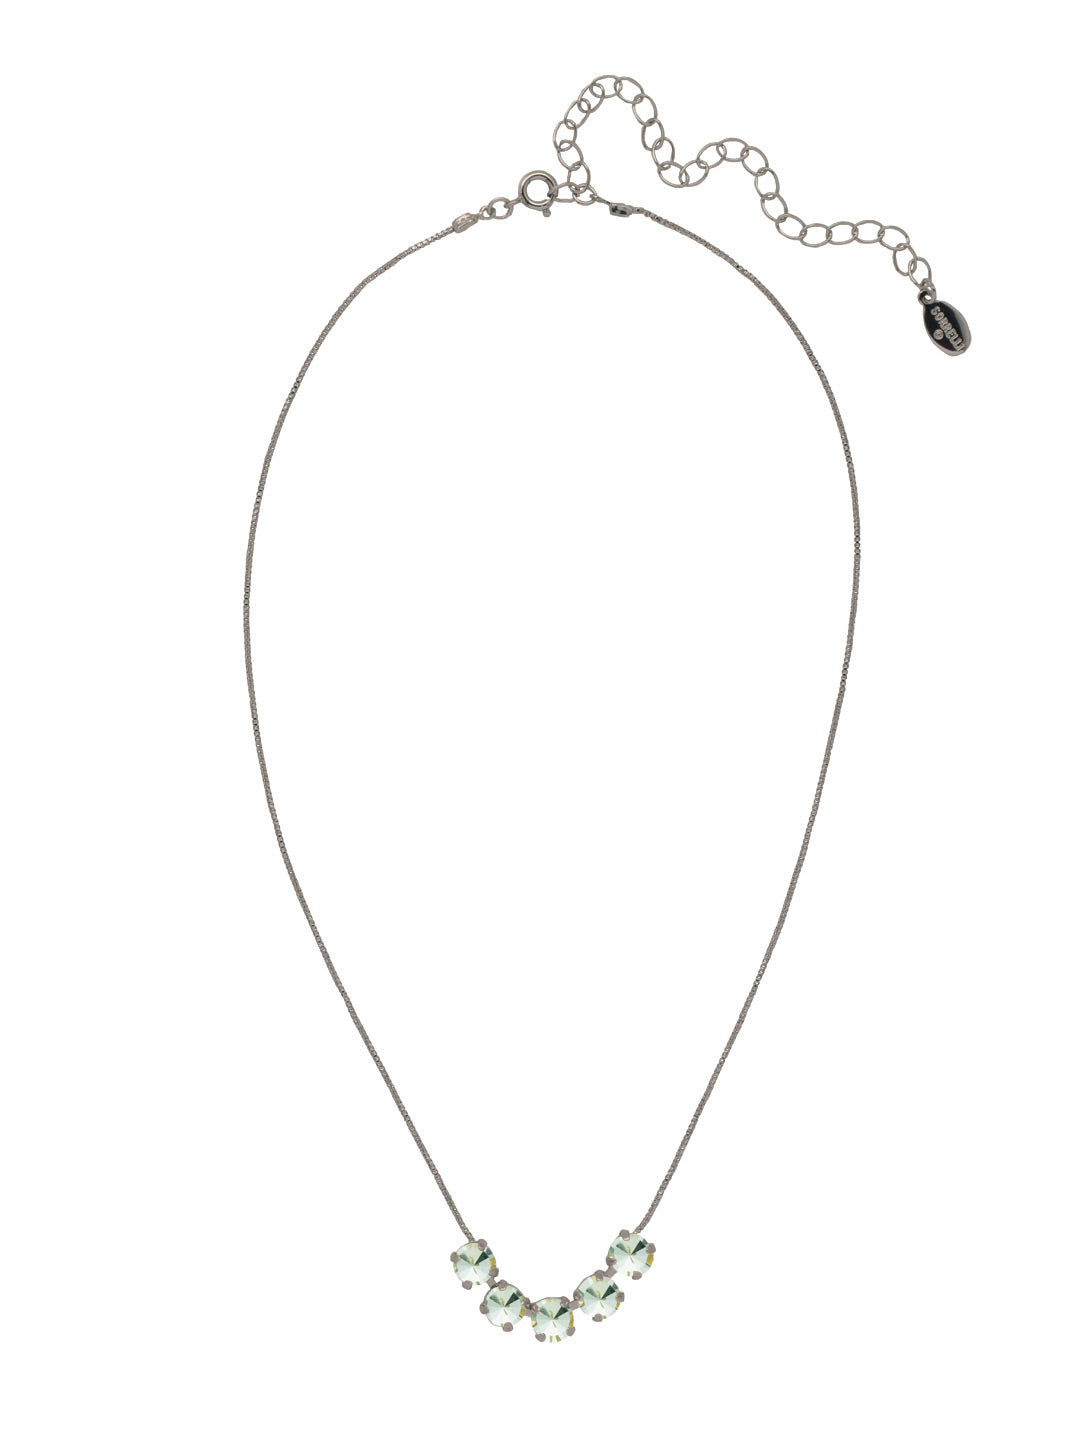 Shaughna Tennis Necklace - NFC84ASMIN - <p>The Shaughna Tennis Necklace features five crystals on a delicate adjustable chain. From Sorrelli's Mint collection in our Antique Silver-tone finish.</p>